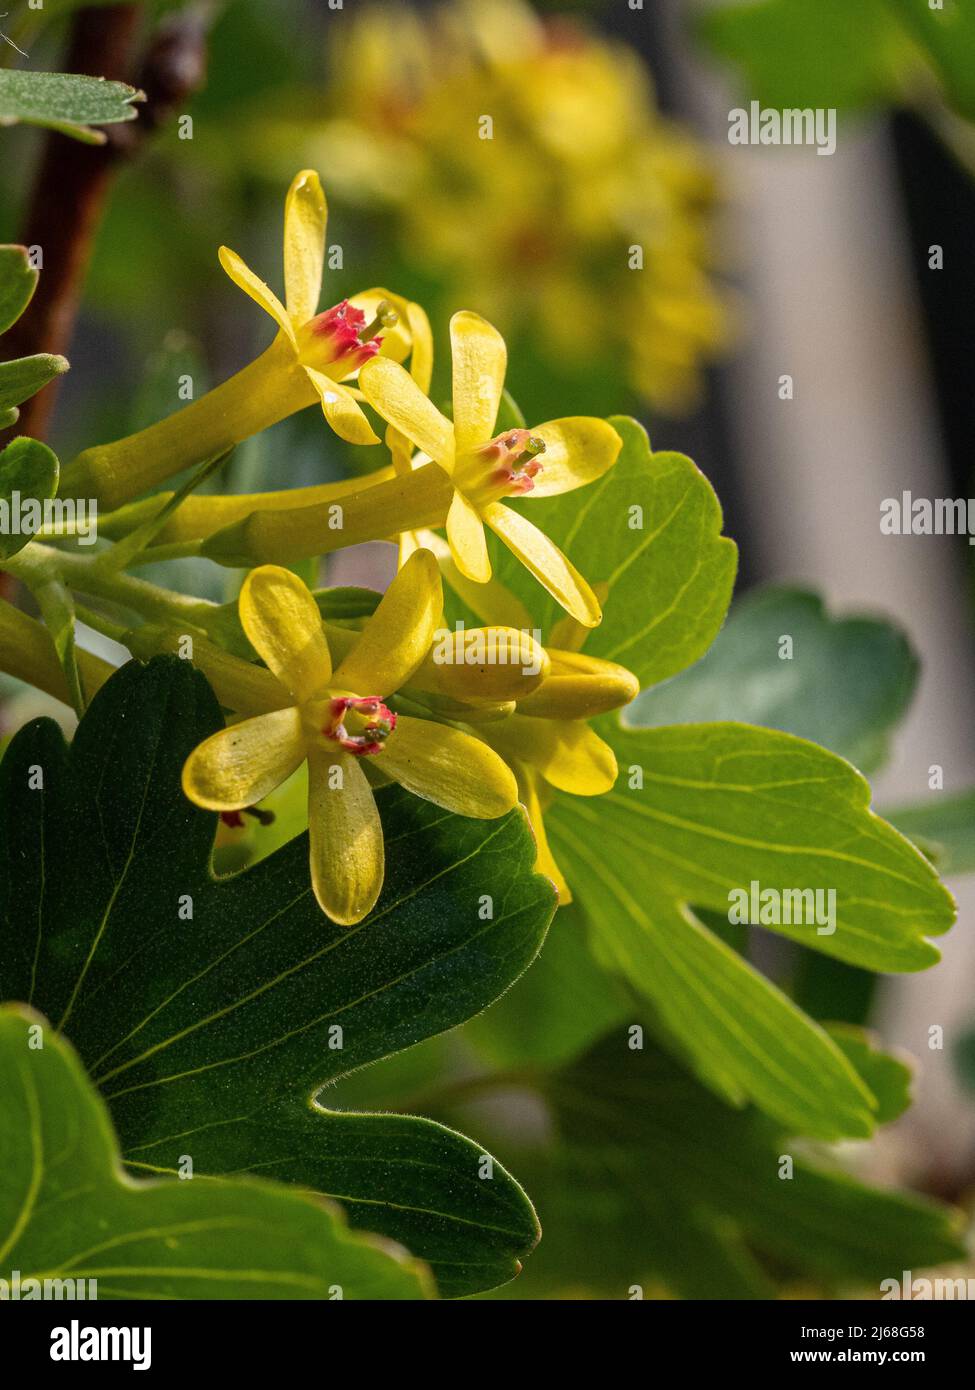 A close up of the yellow flowers of Ribes odoratum showing the red stamens in the centre Stock Photo